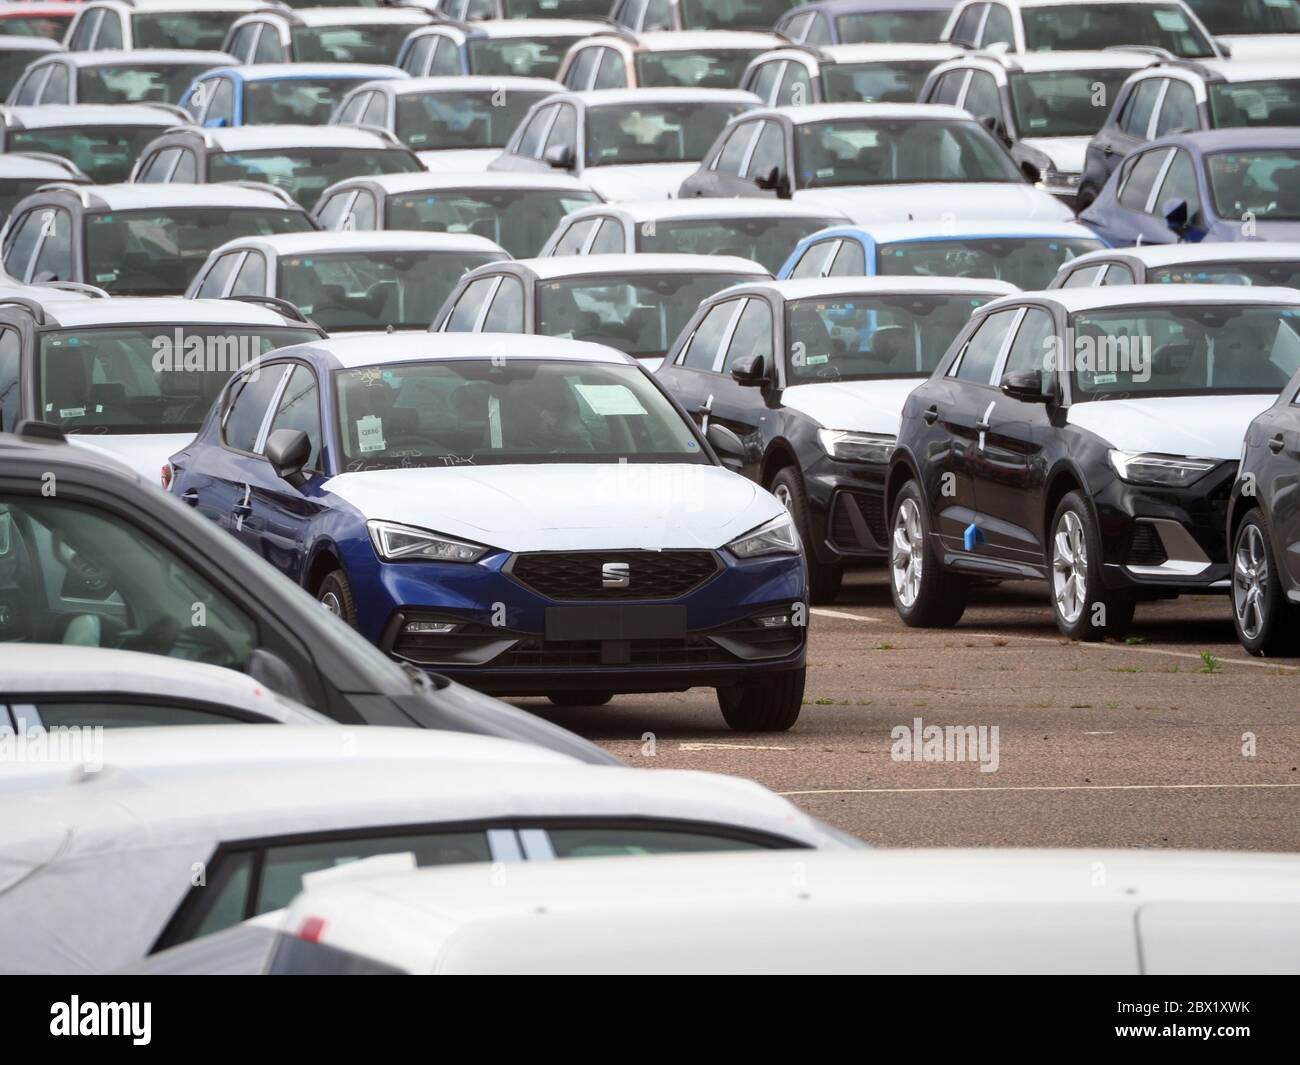 Sheerness, Kent, UK. 4th June, 2020. Thousands of new cars stored in vast storage areas at the Port of Sheerness in Kent today. The Society of Motor Manufacturers and Traders (SMMT) said new car sales for May are 89 per cent down on last year - the lowest since 1952. Credit: James Bell/Alamy Live News Stock Photo